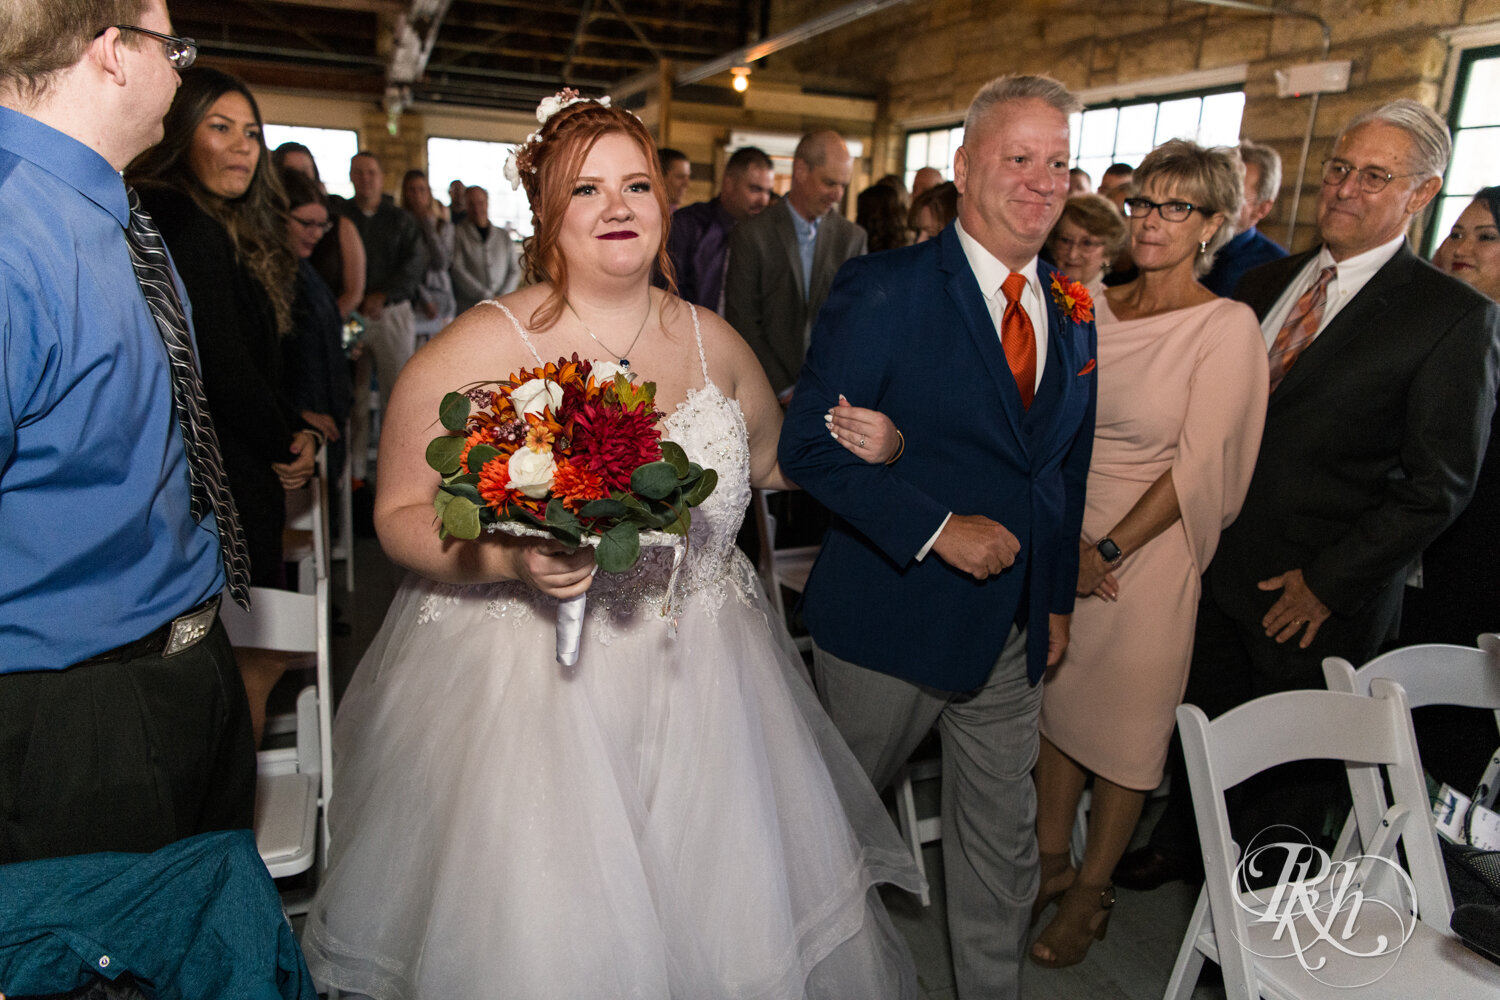 Plus size bride walks down aisle during wedding ceremony at Olmsted County Fairgrounds in Rochester, Minnesota.